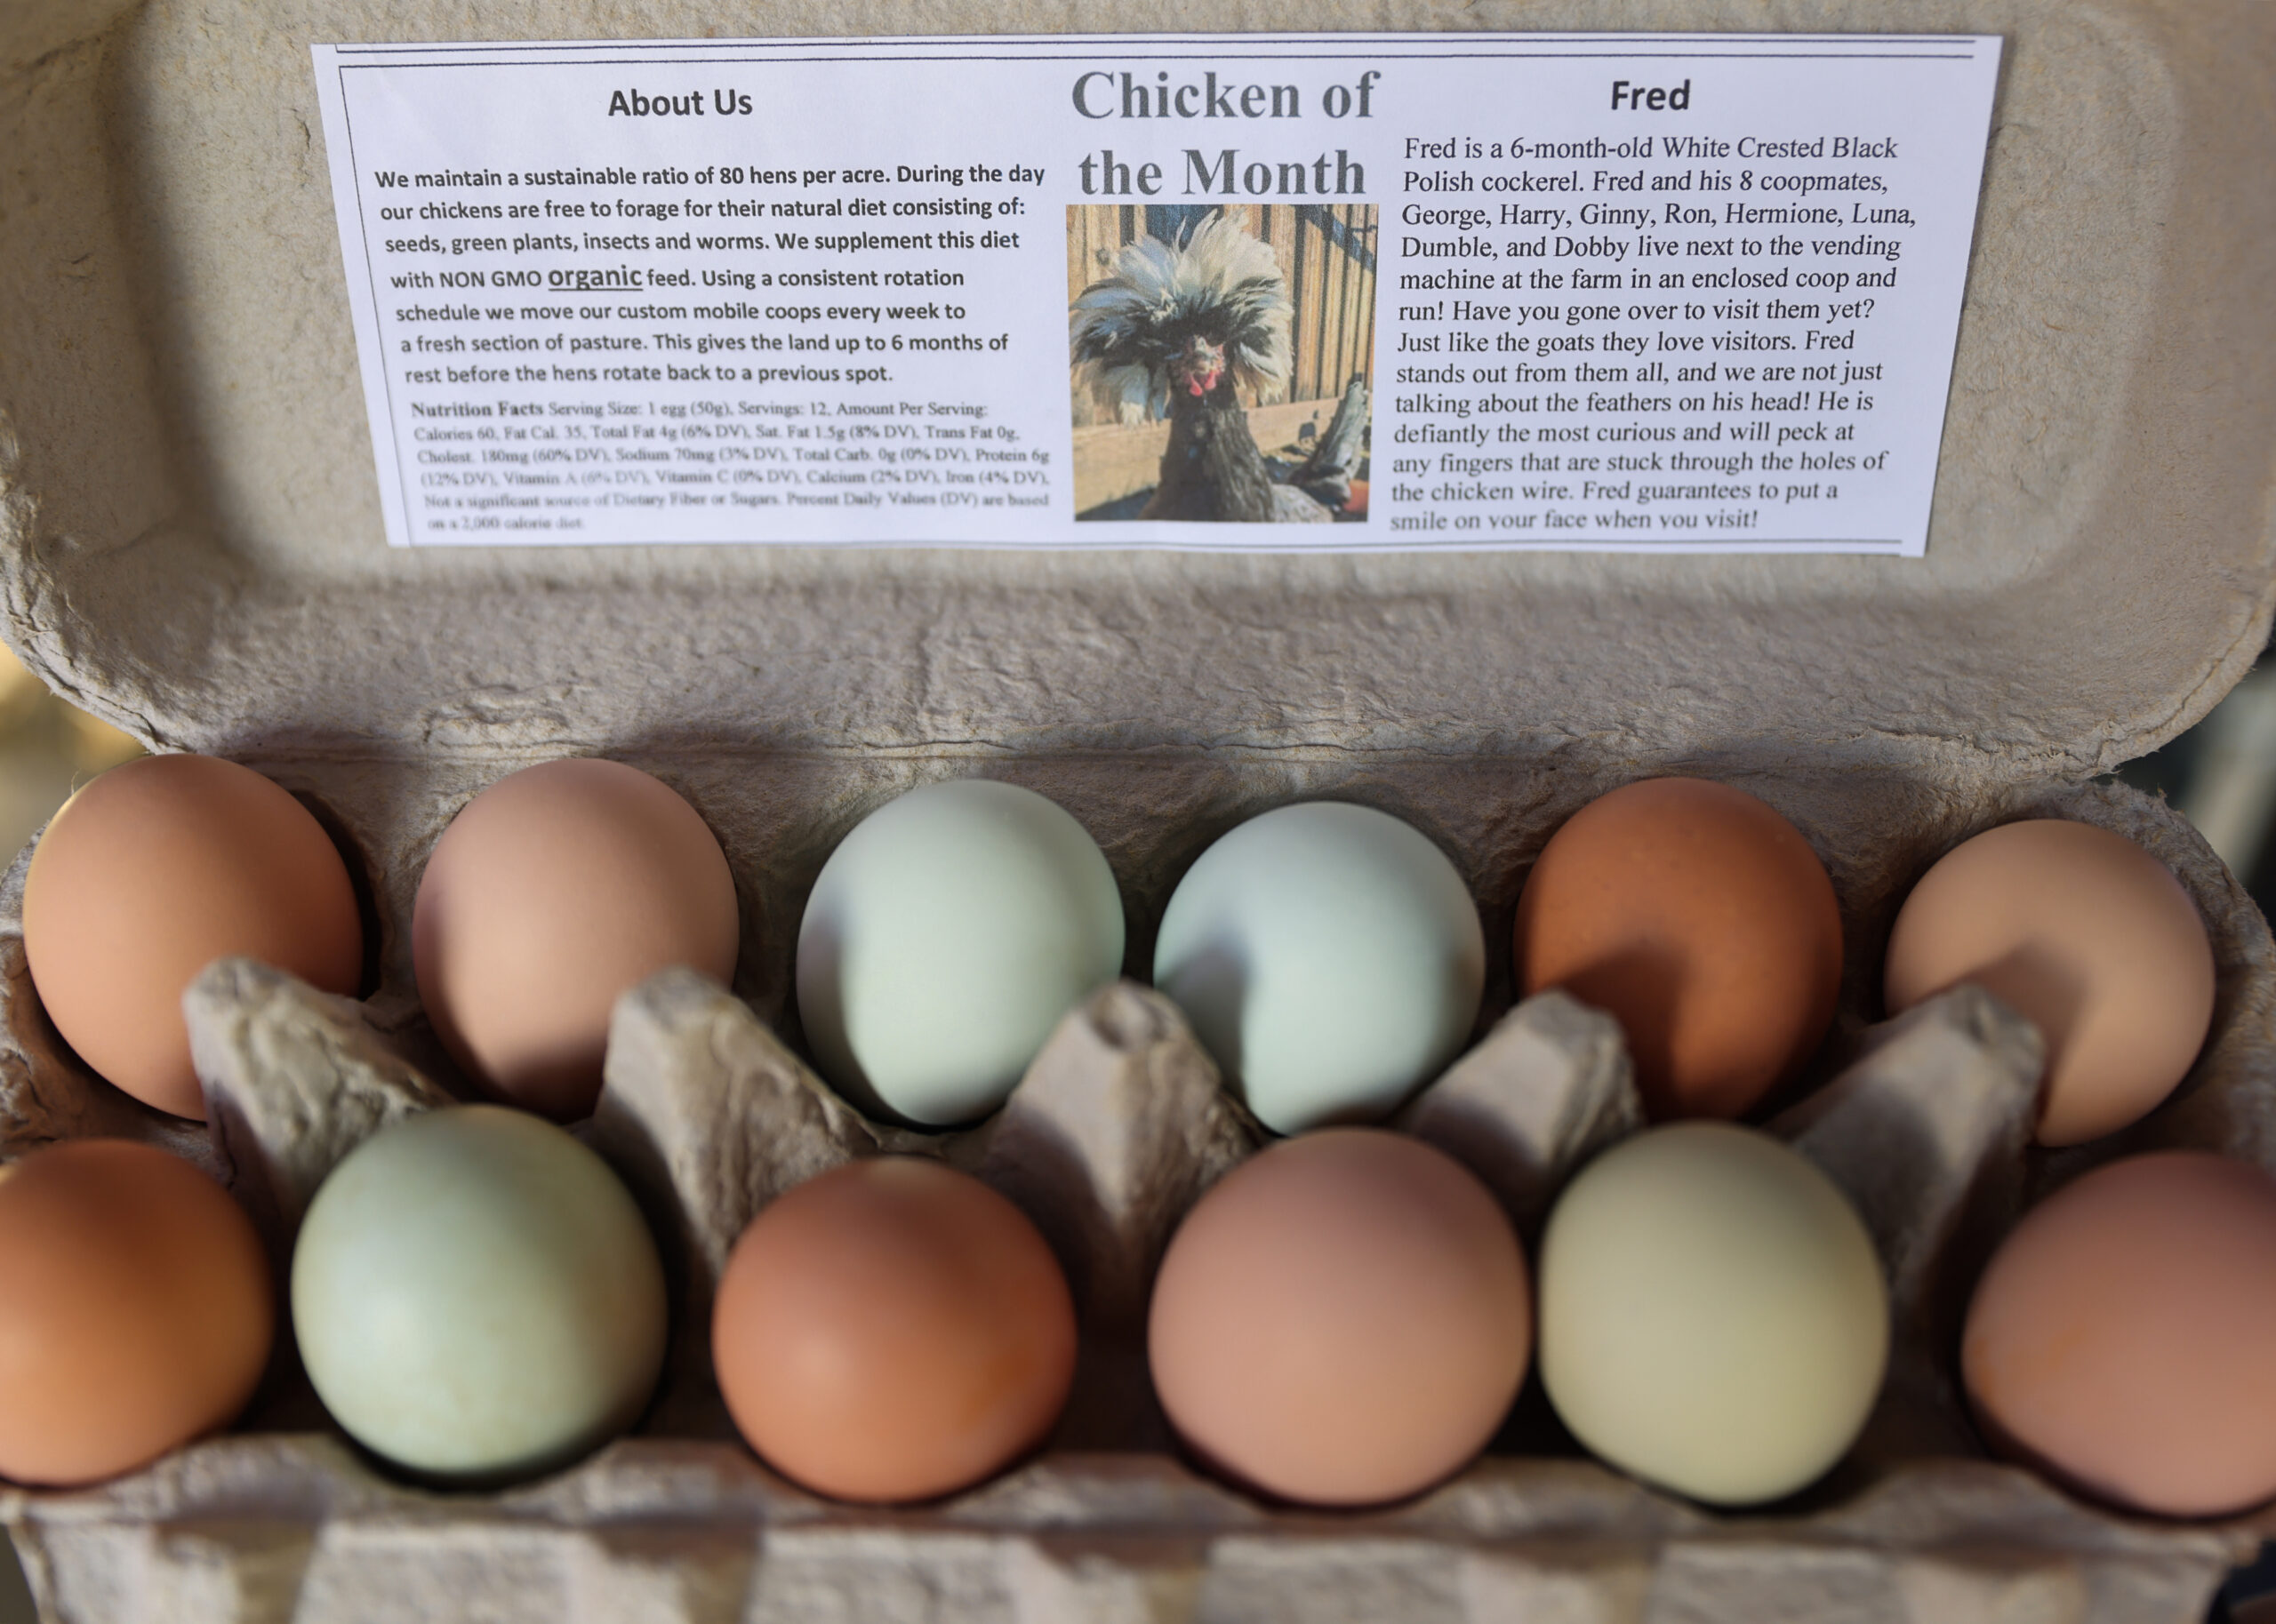 A carton of eggs from the egg vending machine at Wise Acre Farm in Windsor. (Christopher Chung/The Press Democrat)